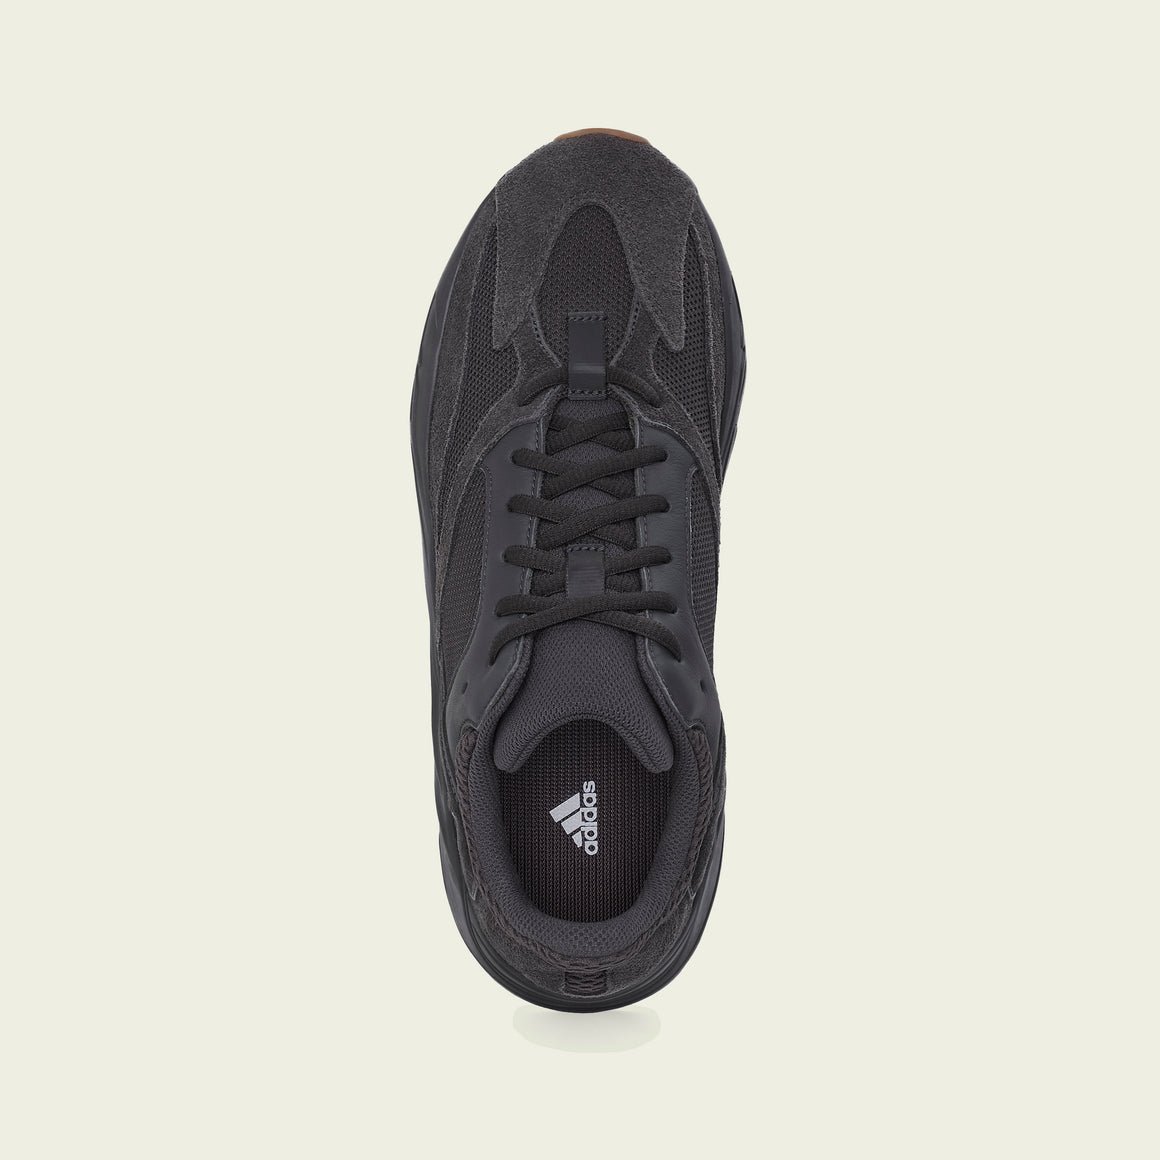 adidas - Yeezy Boost 700 - Utility Black - UP THERE